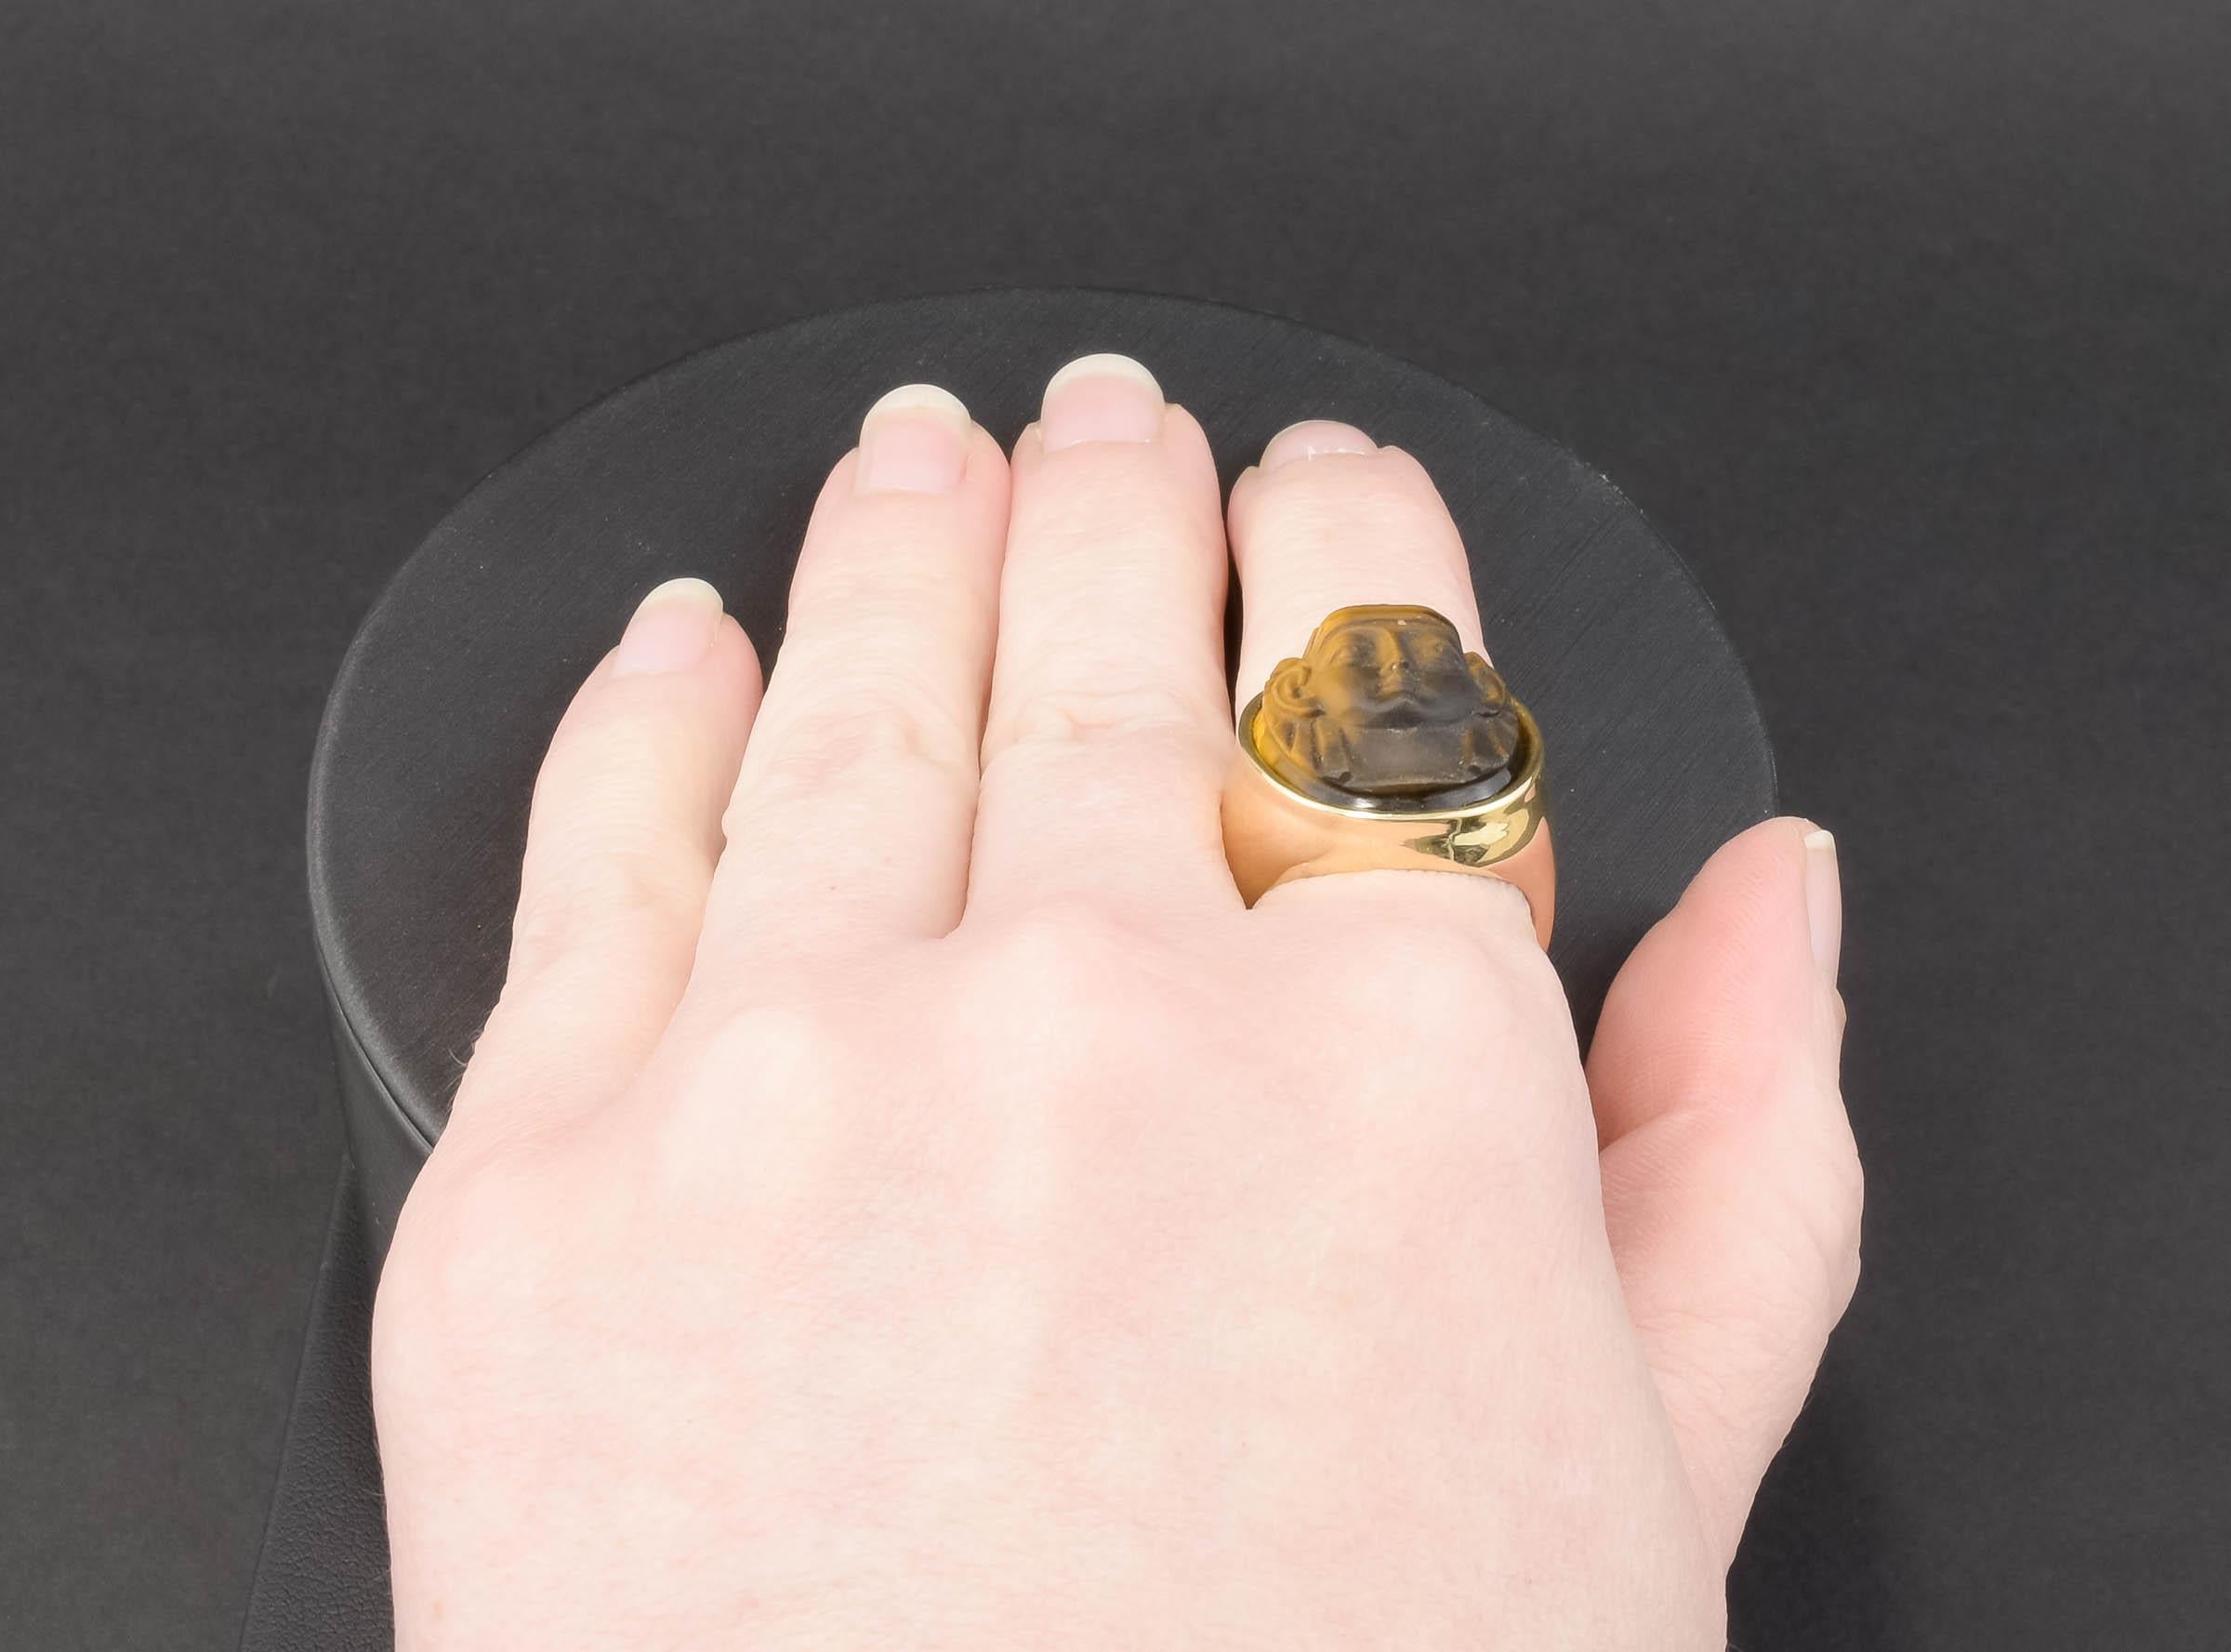 Egyptian Revival Carved Tigers Eye Pharaoh Gold Signet Ring - Antique Conversion 1